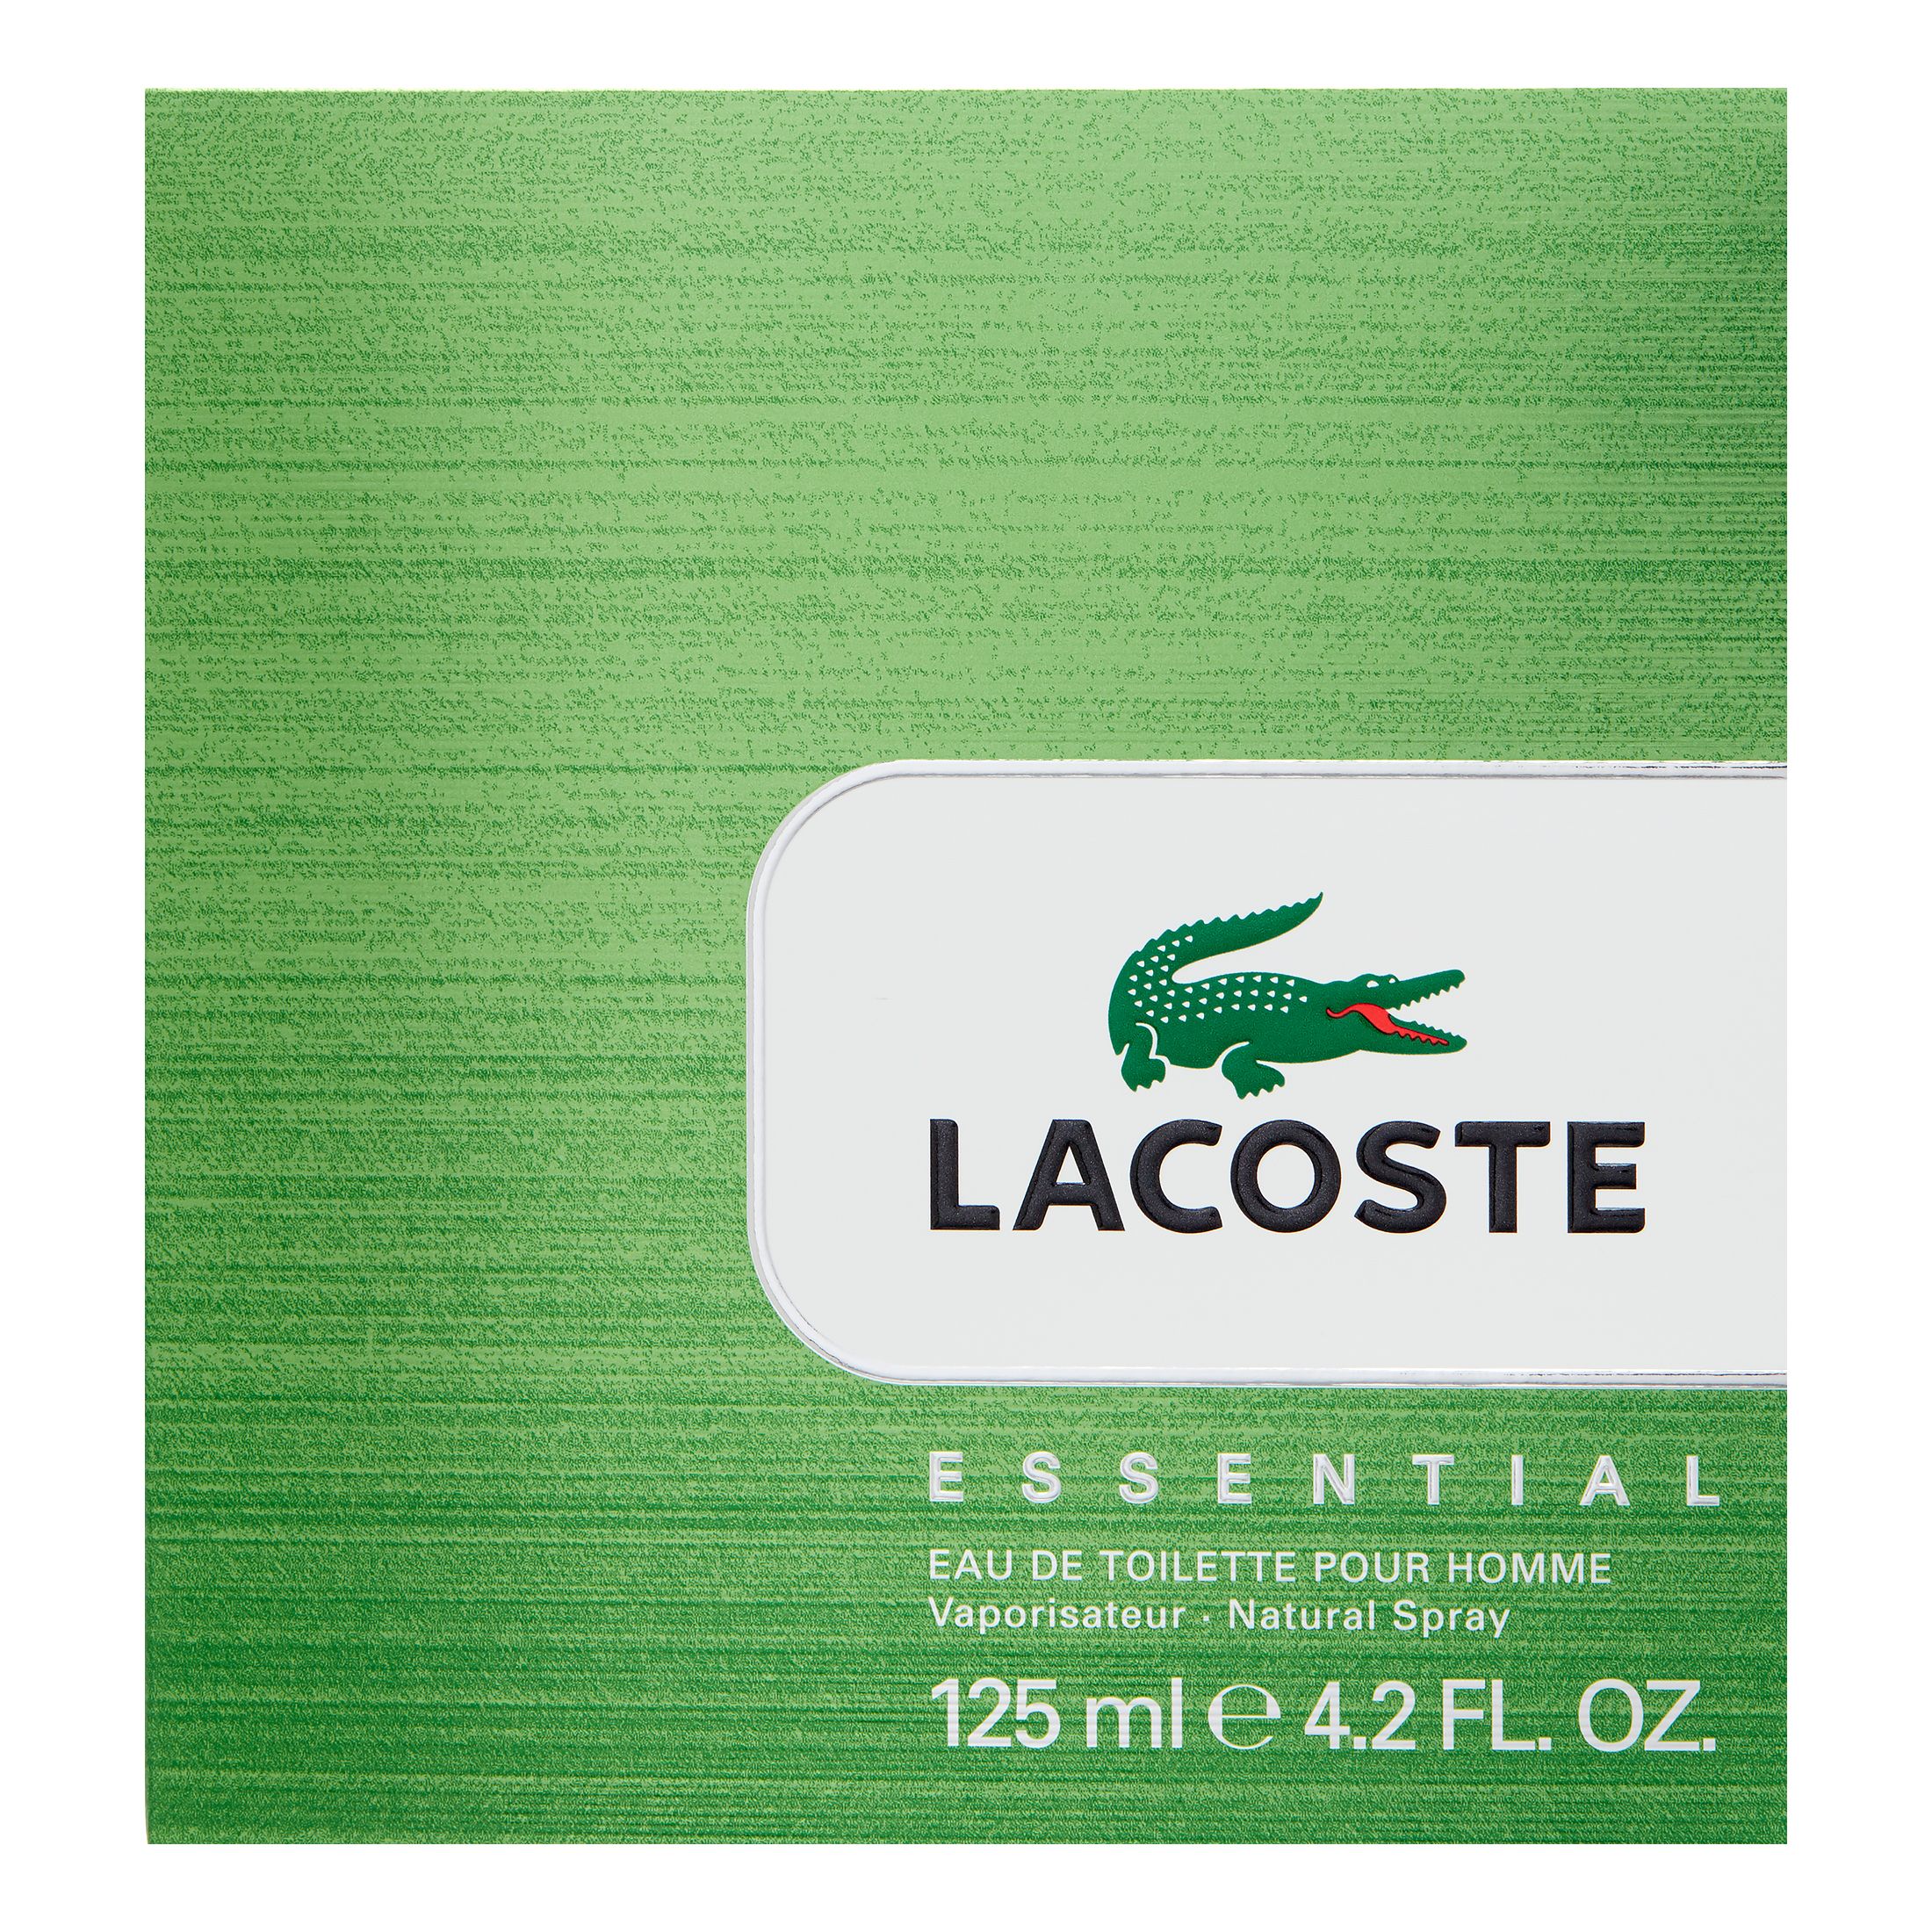 LACOSTE ESSENTIAL BY LACOSTE By LACOSTE For MEN - image 4 of 7